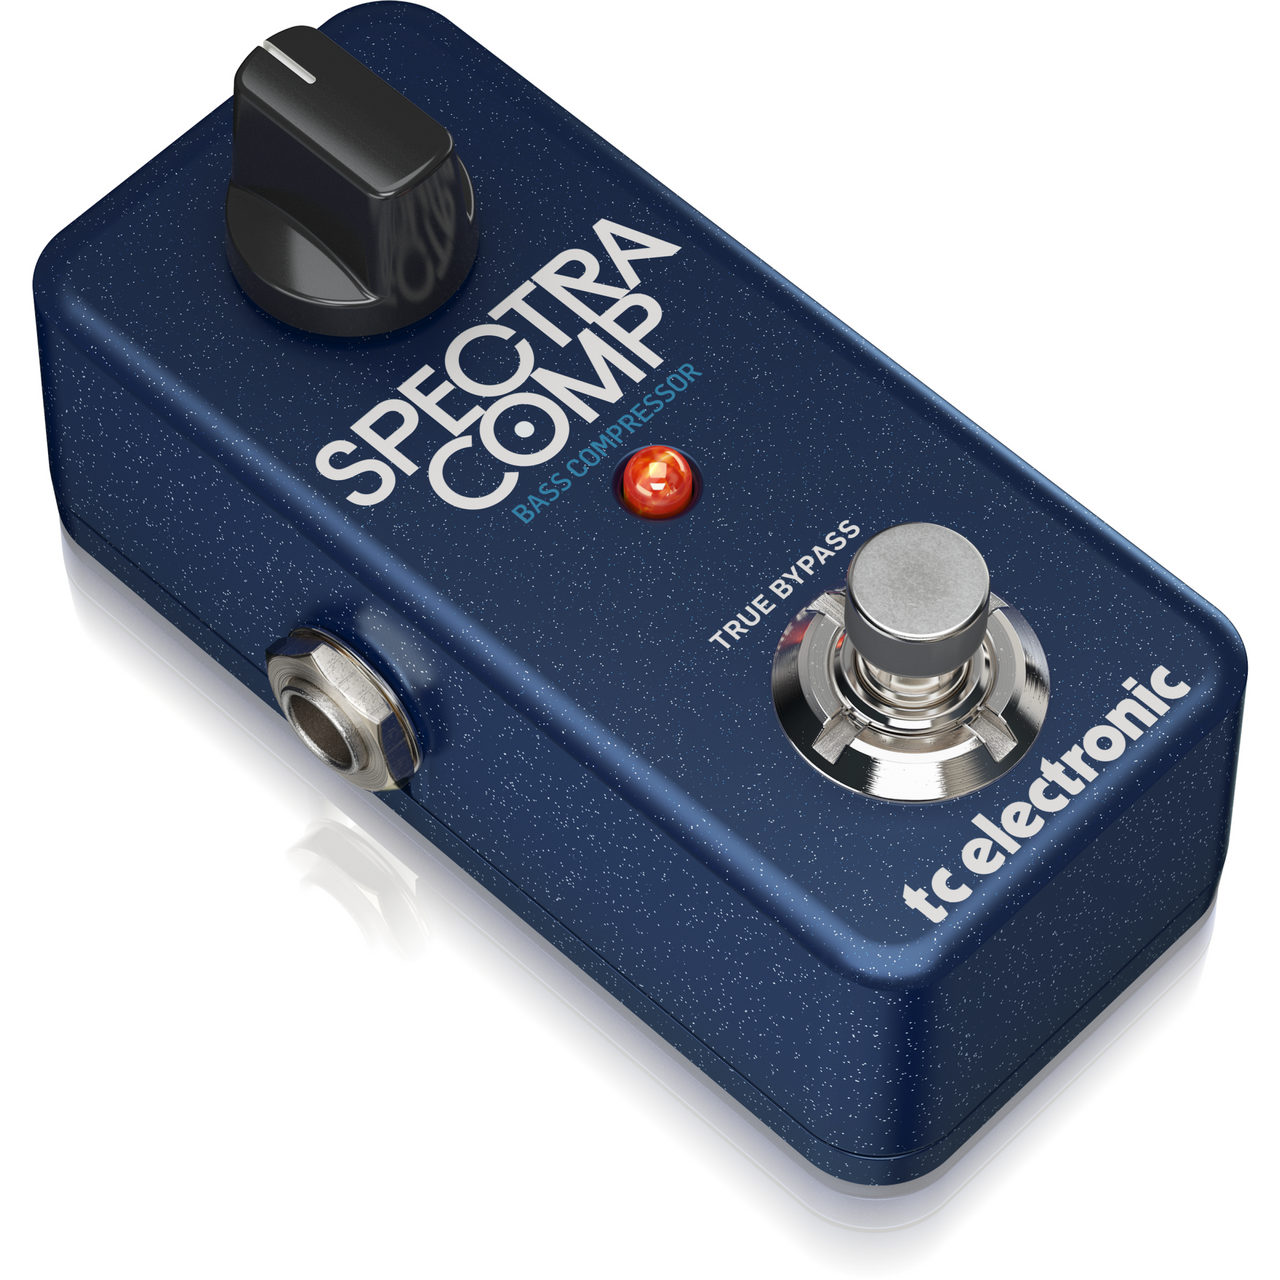 Pedal T.C. Para Bajo Spectracomp Bass Comp